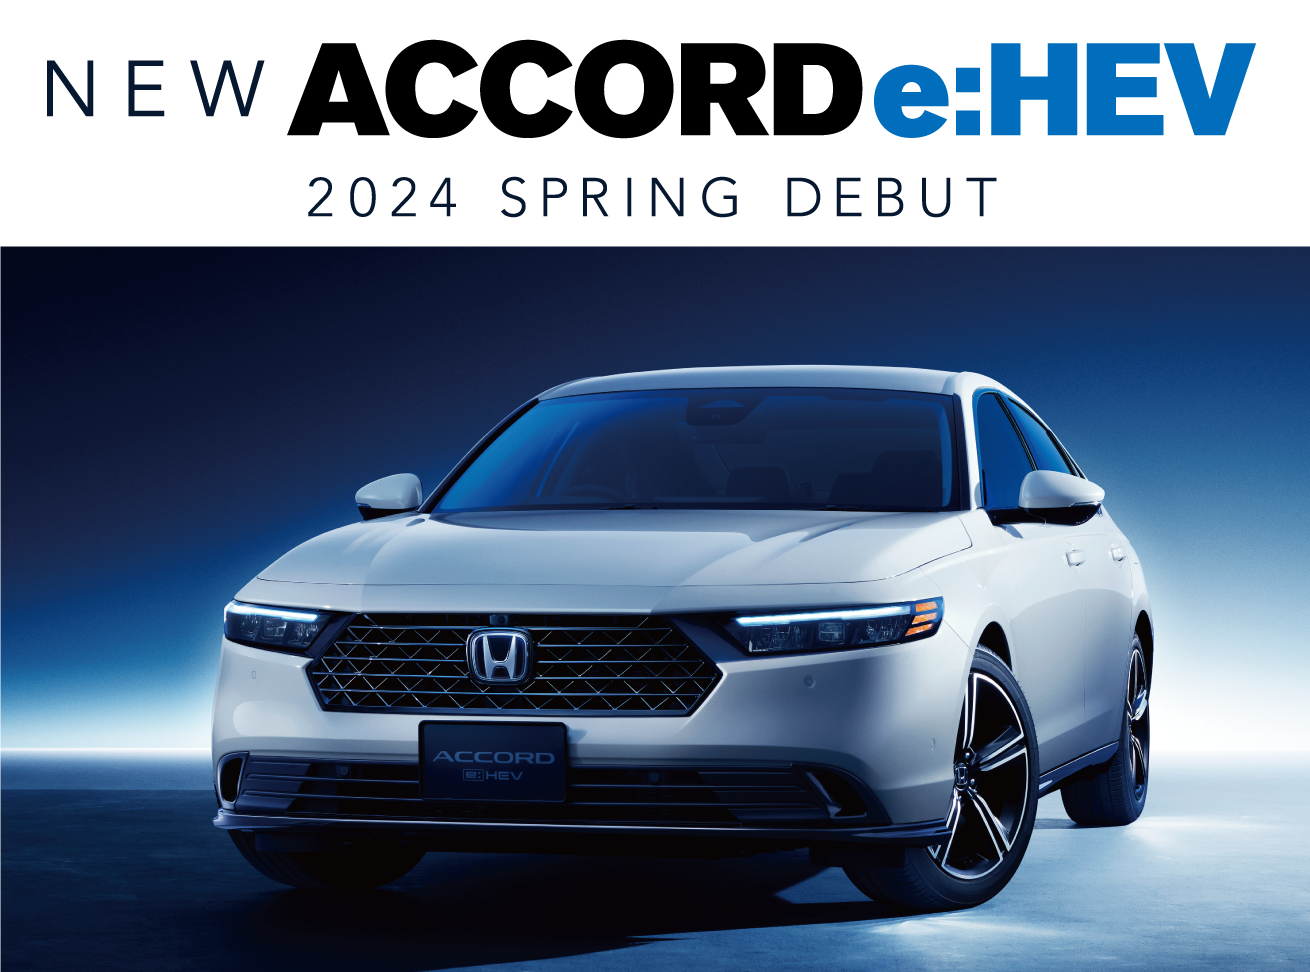 http://2024年春発売予定の新型「ACCORD」をホームページで先行公開